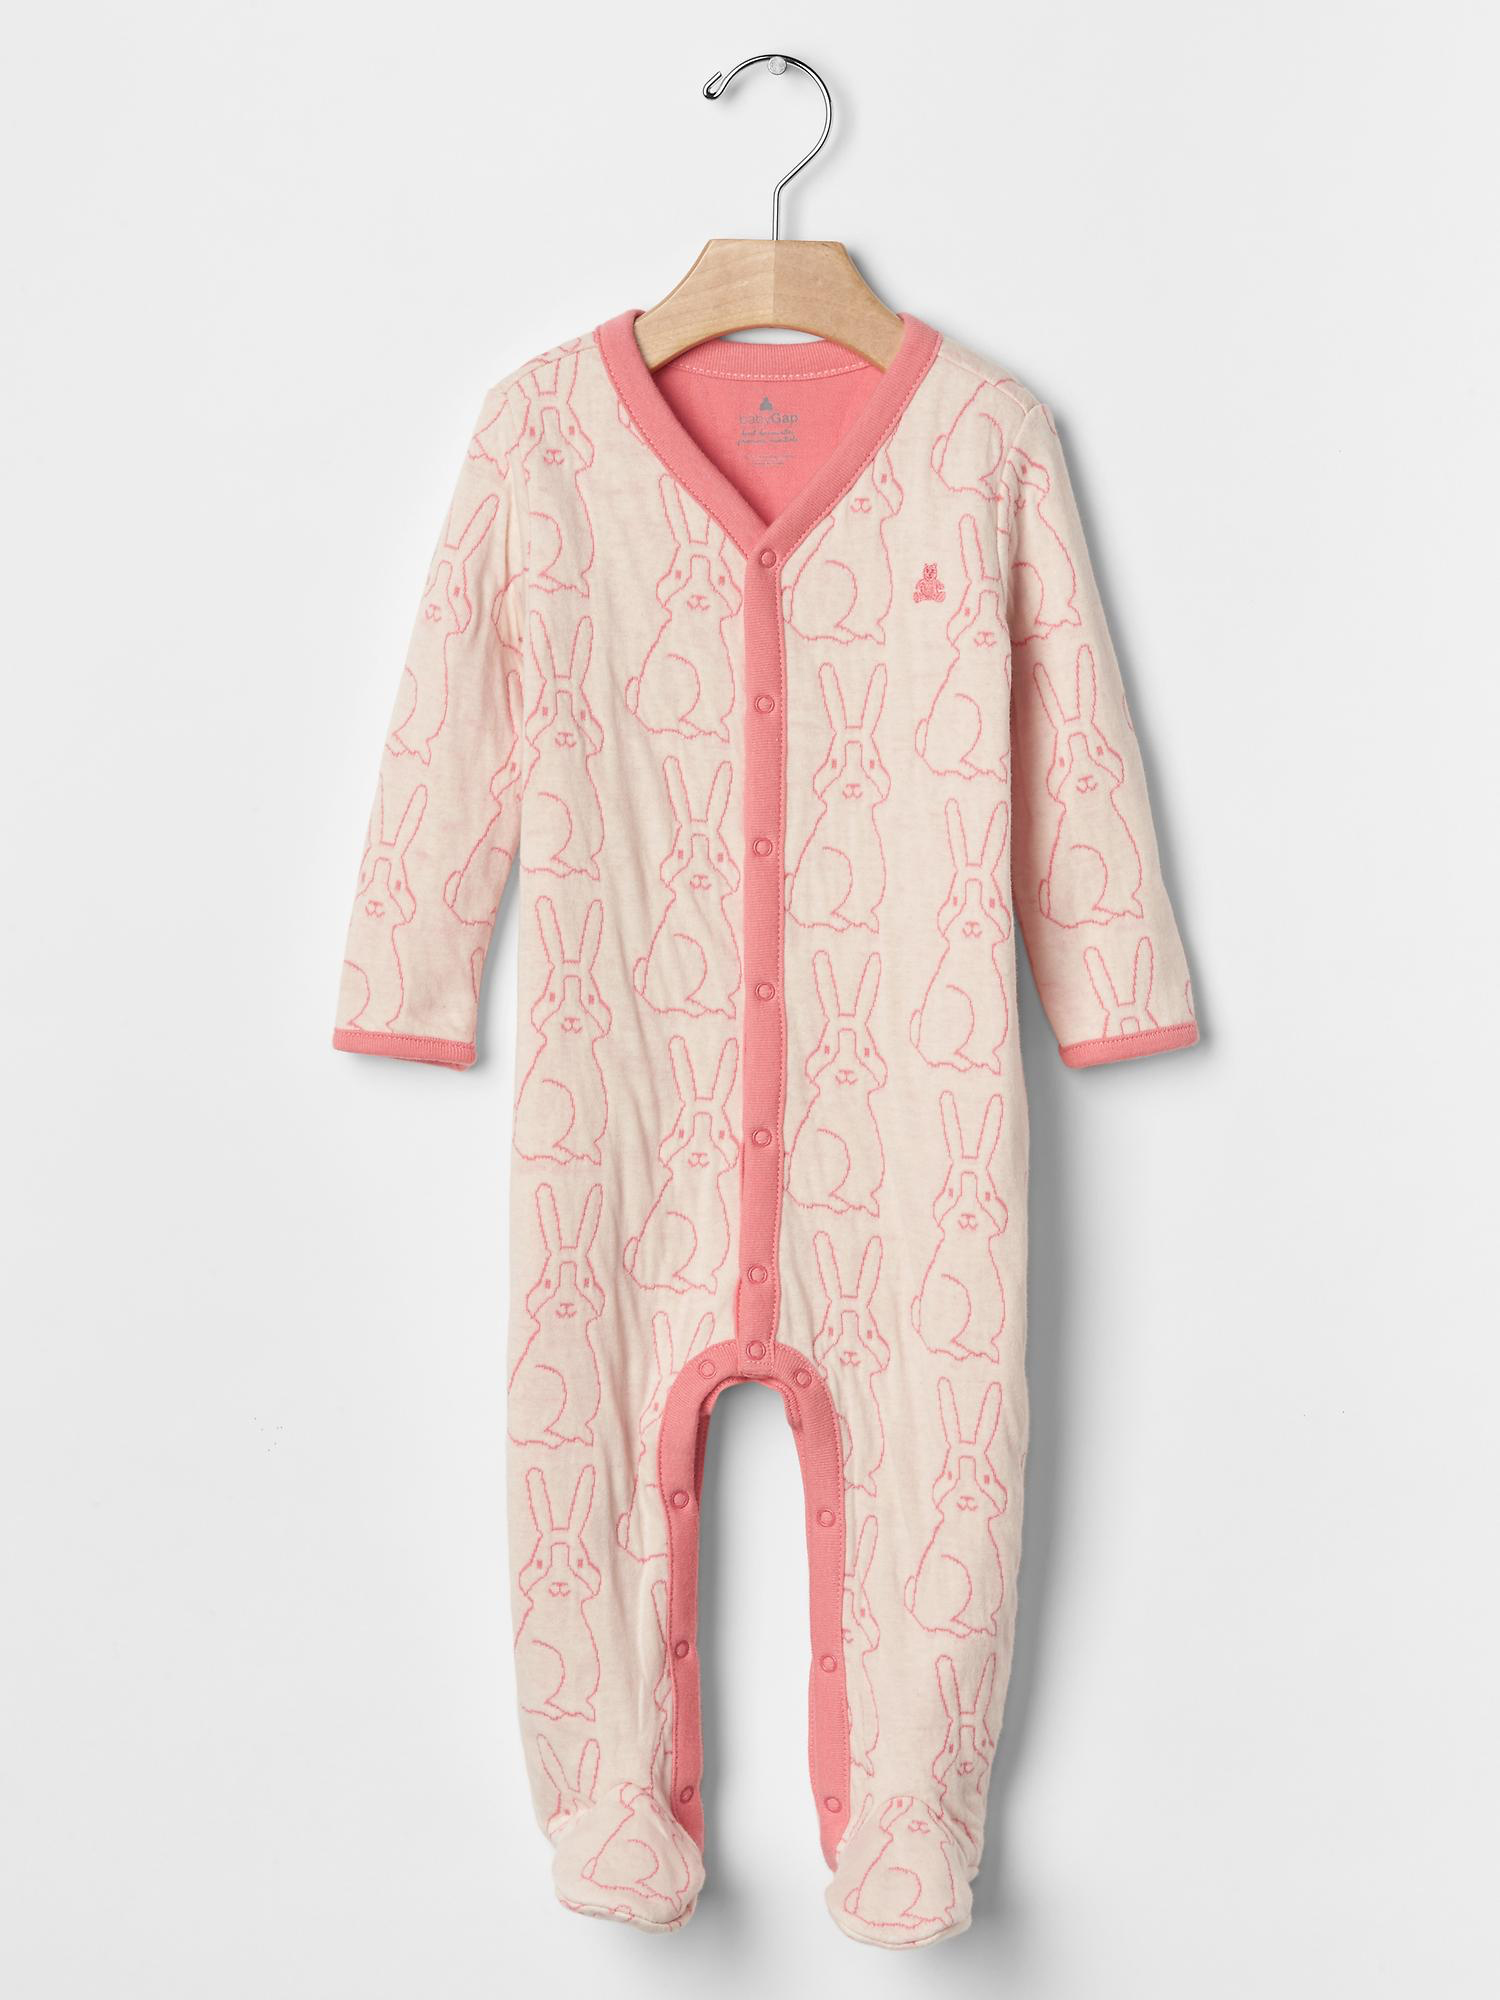 Bunny Jacquard One-Piece from Gap